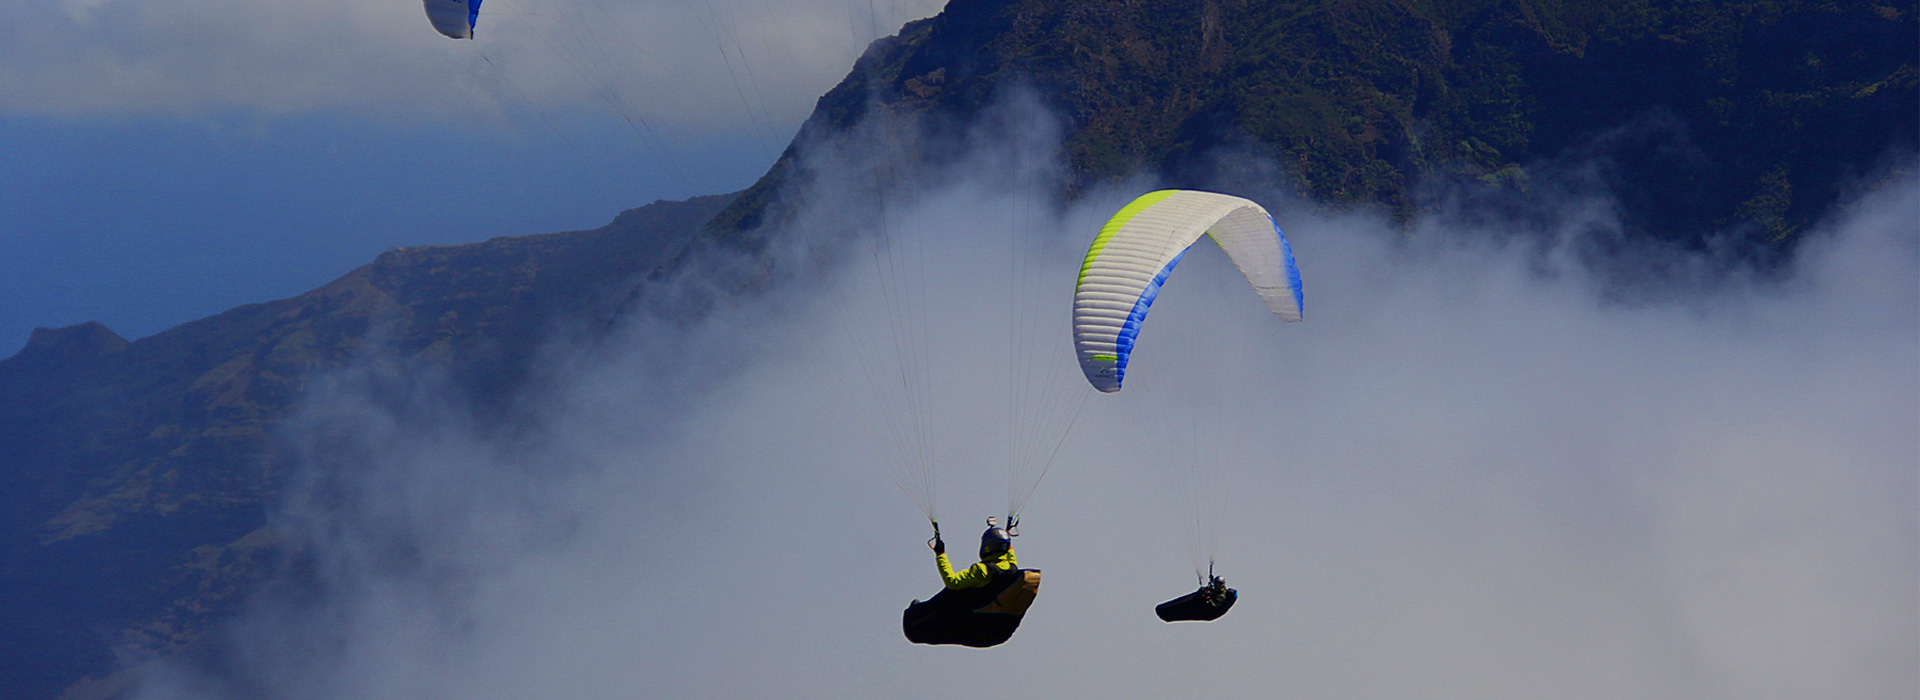 PARAGLIDING IN TENERIFE